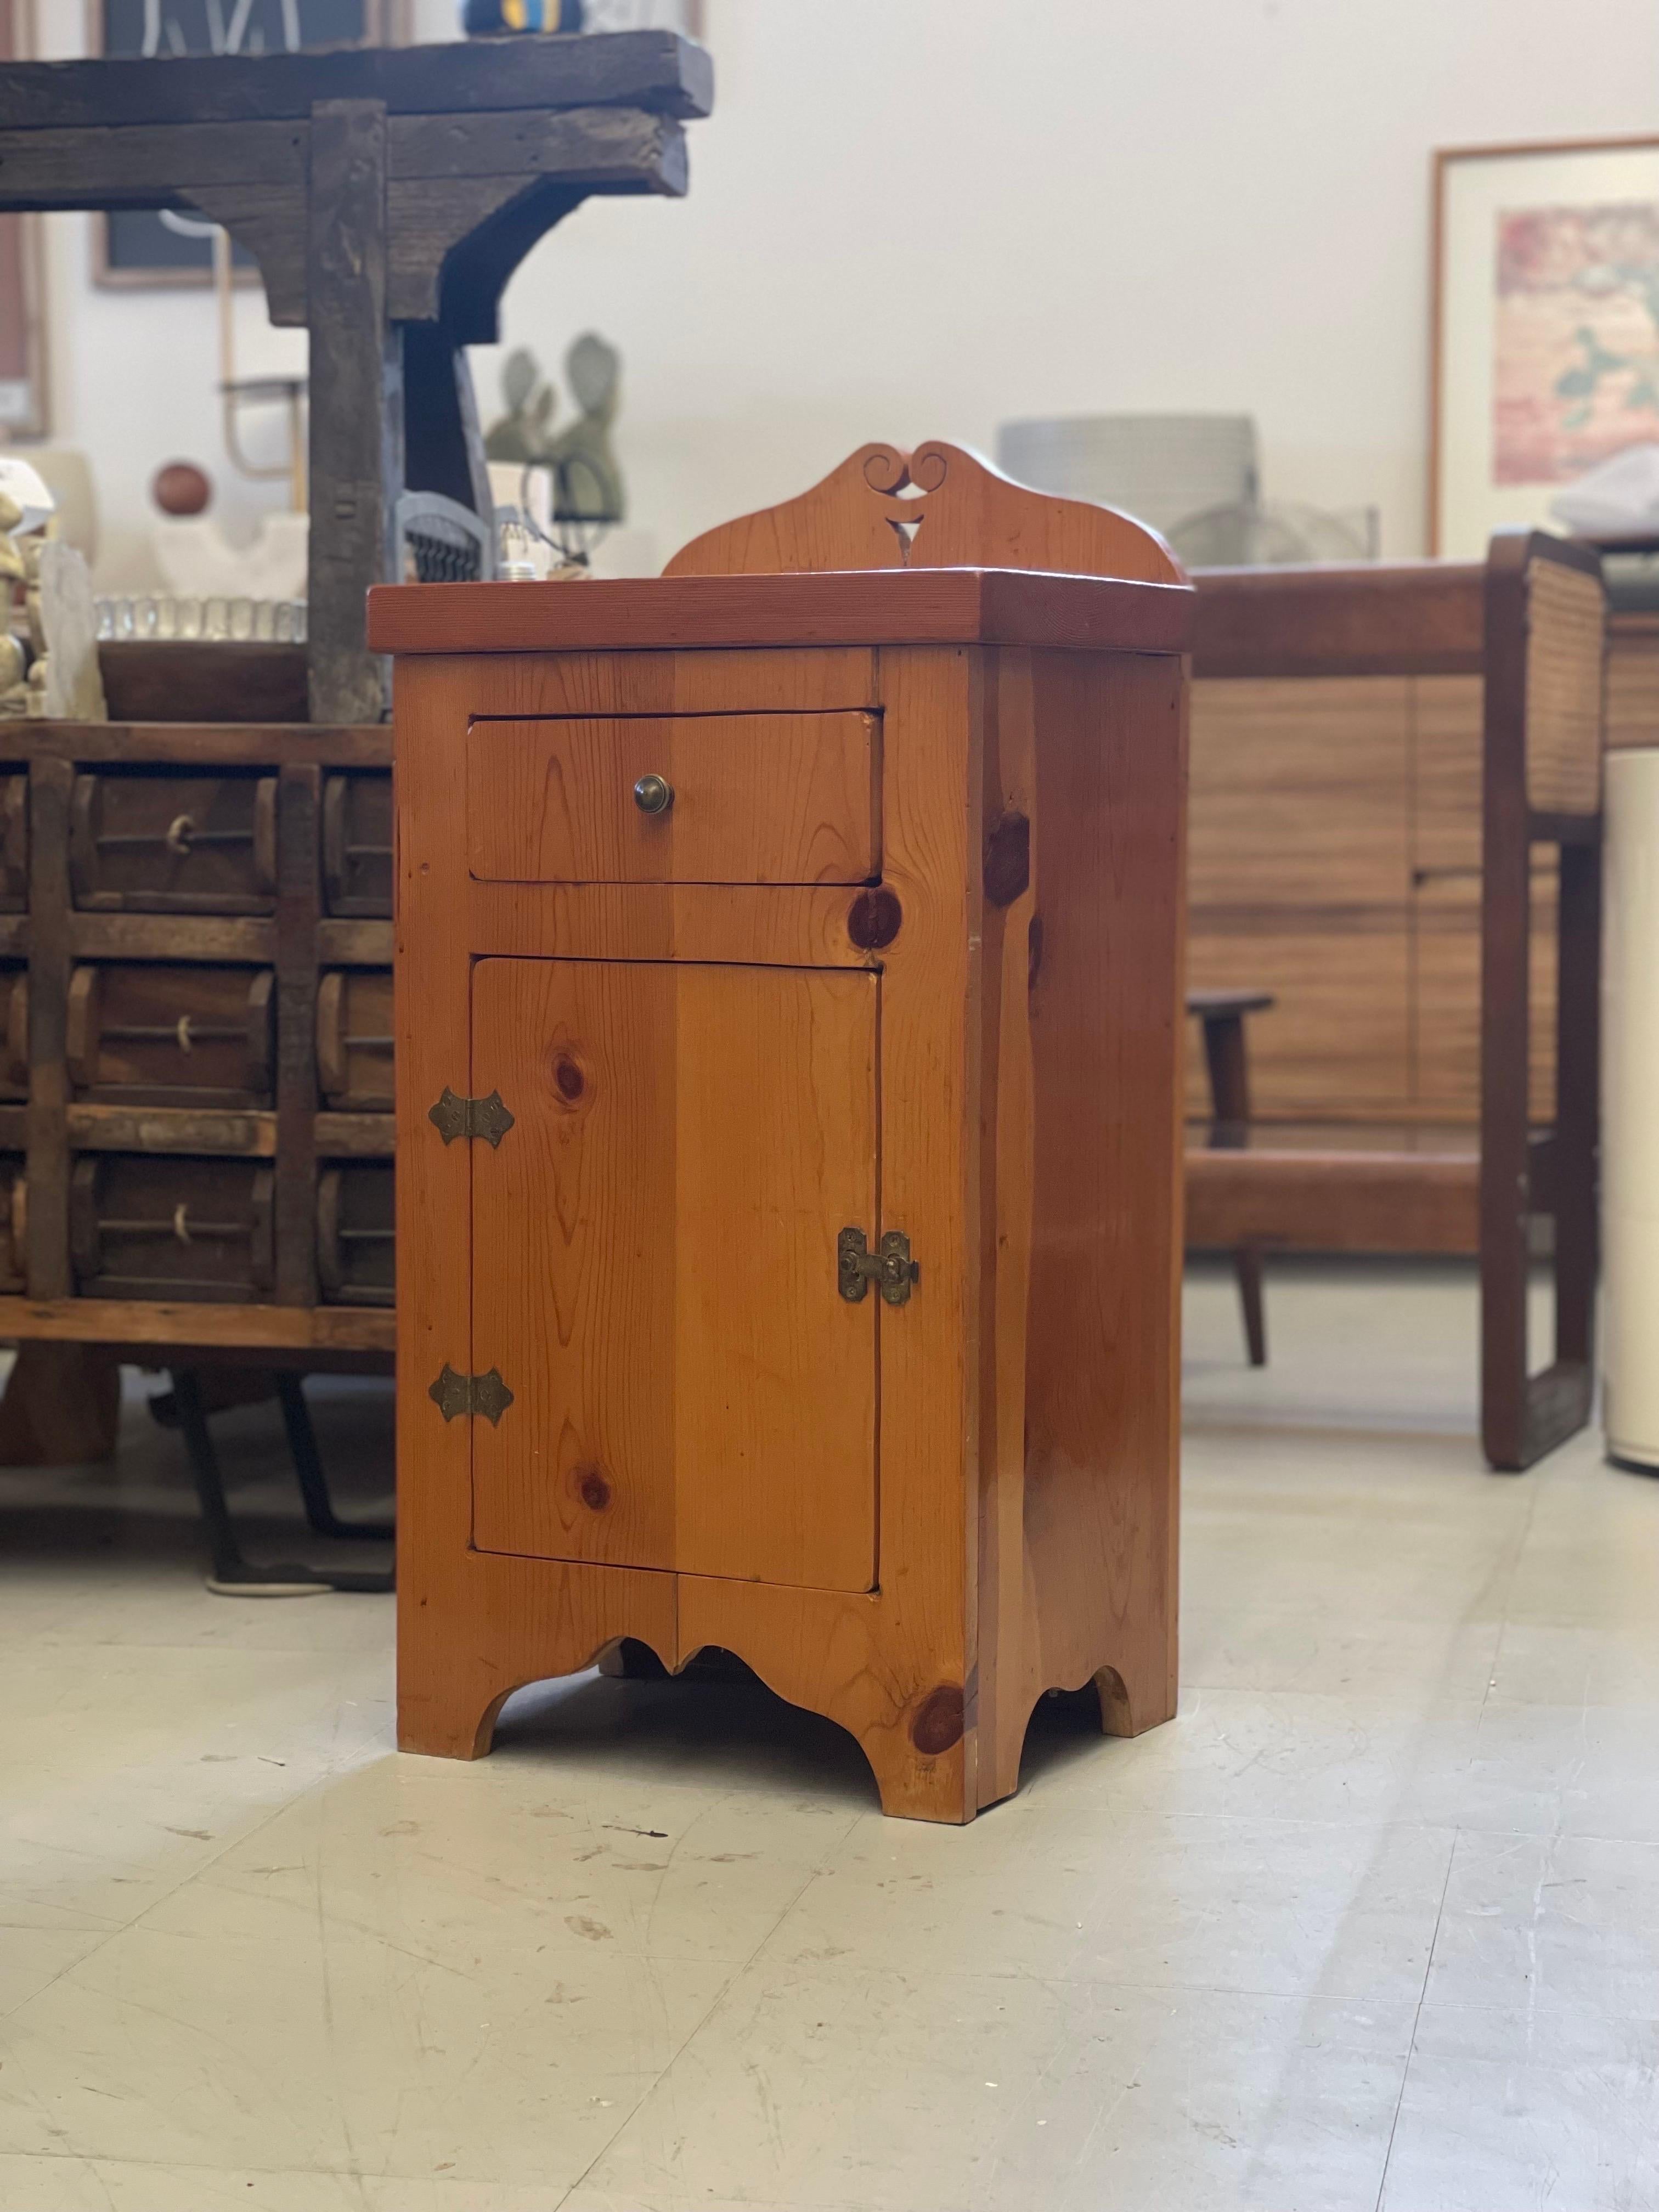 Vintage Mid-Century Modern accent table dovetail drawers circa 1950s - 1970s.

Dimensions. 15 W ; 26 1/2 H ; 15 D.